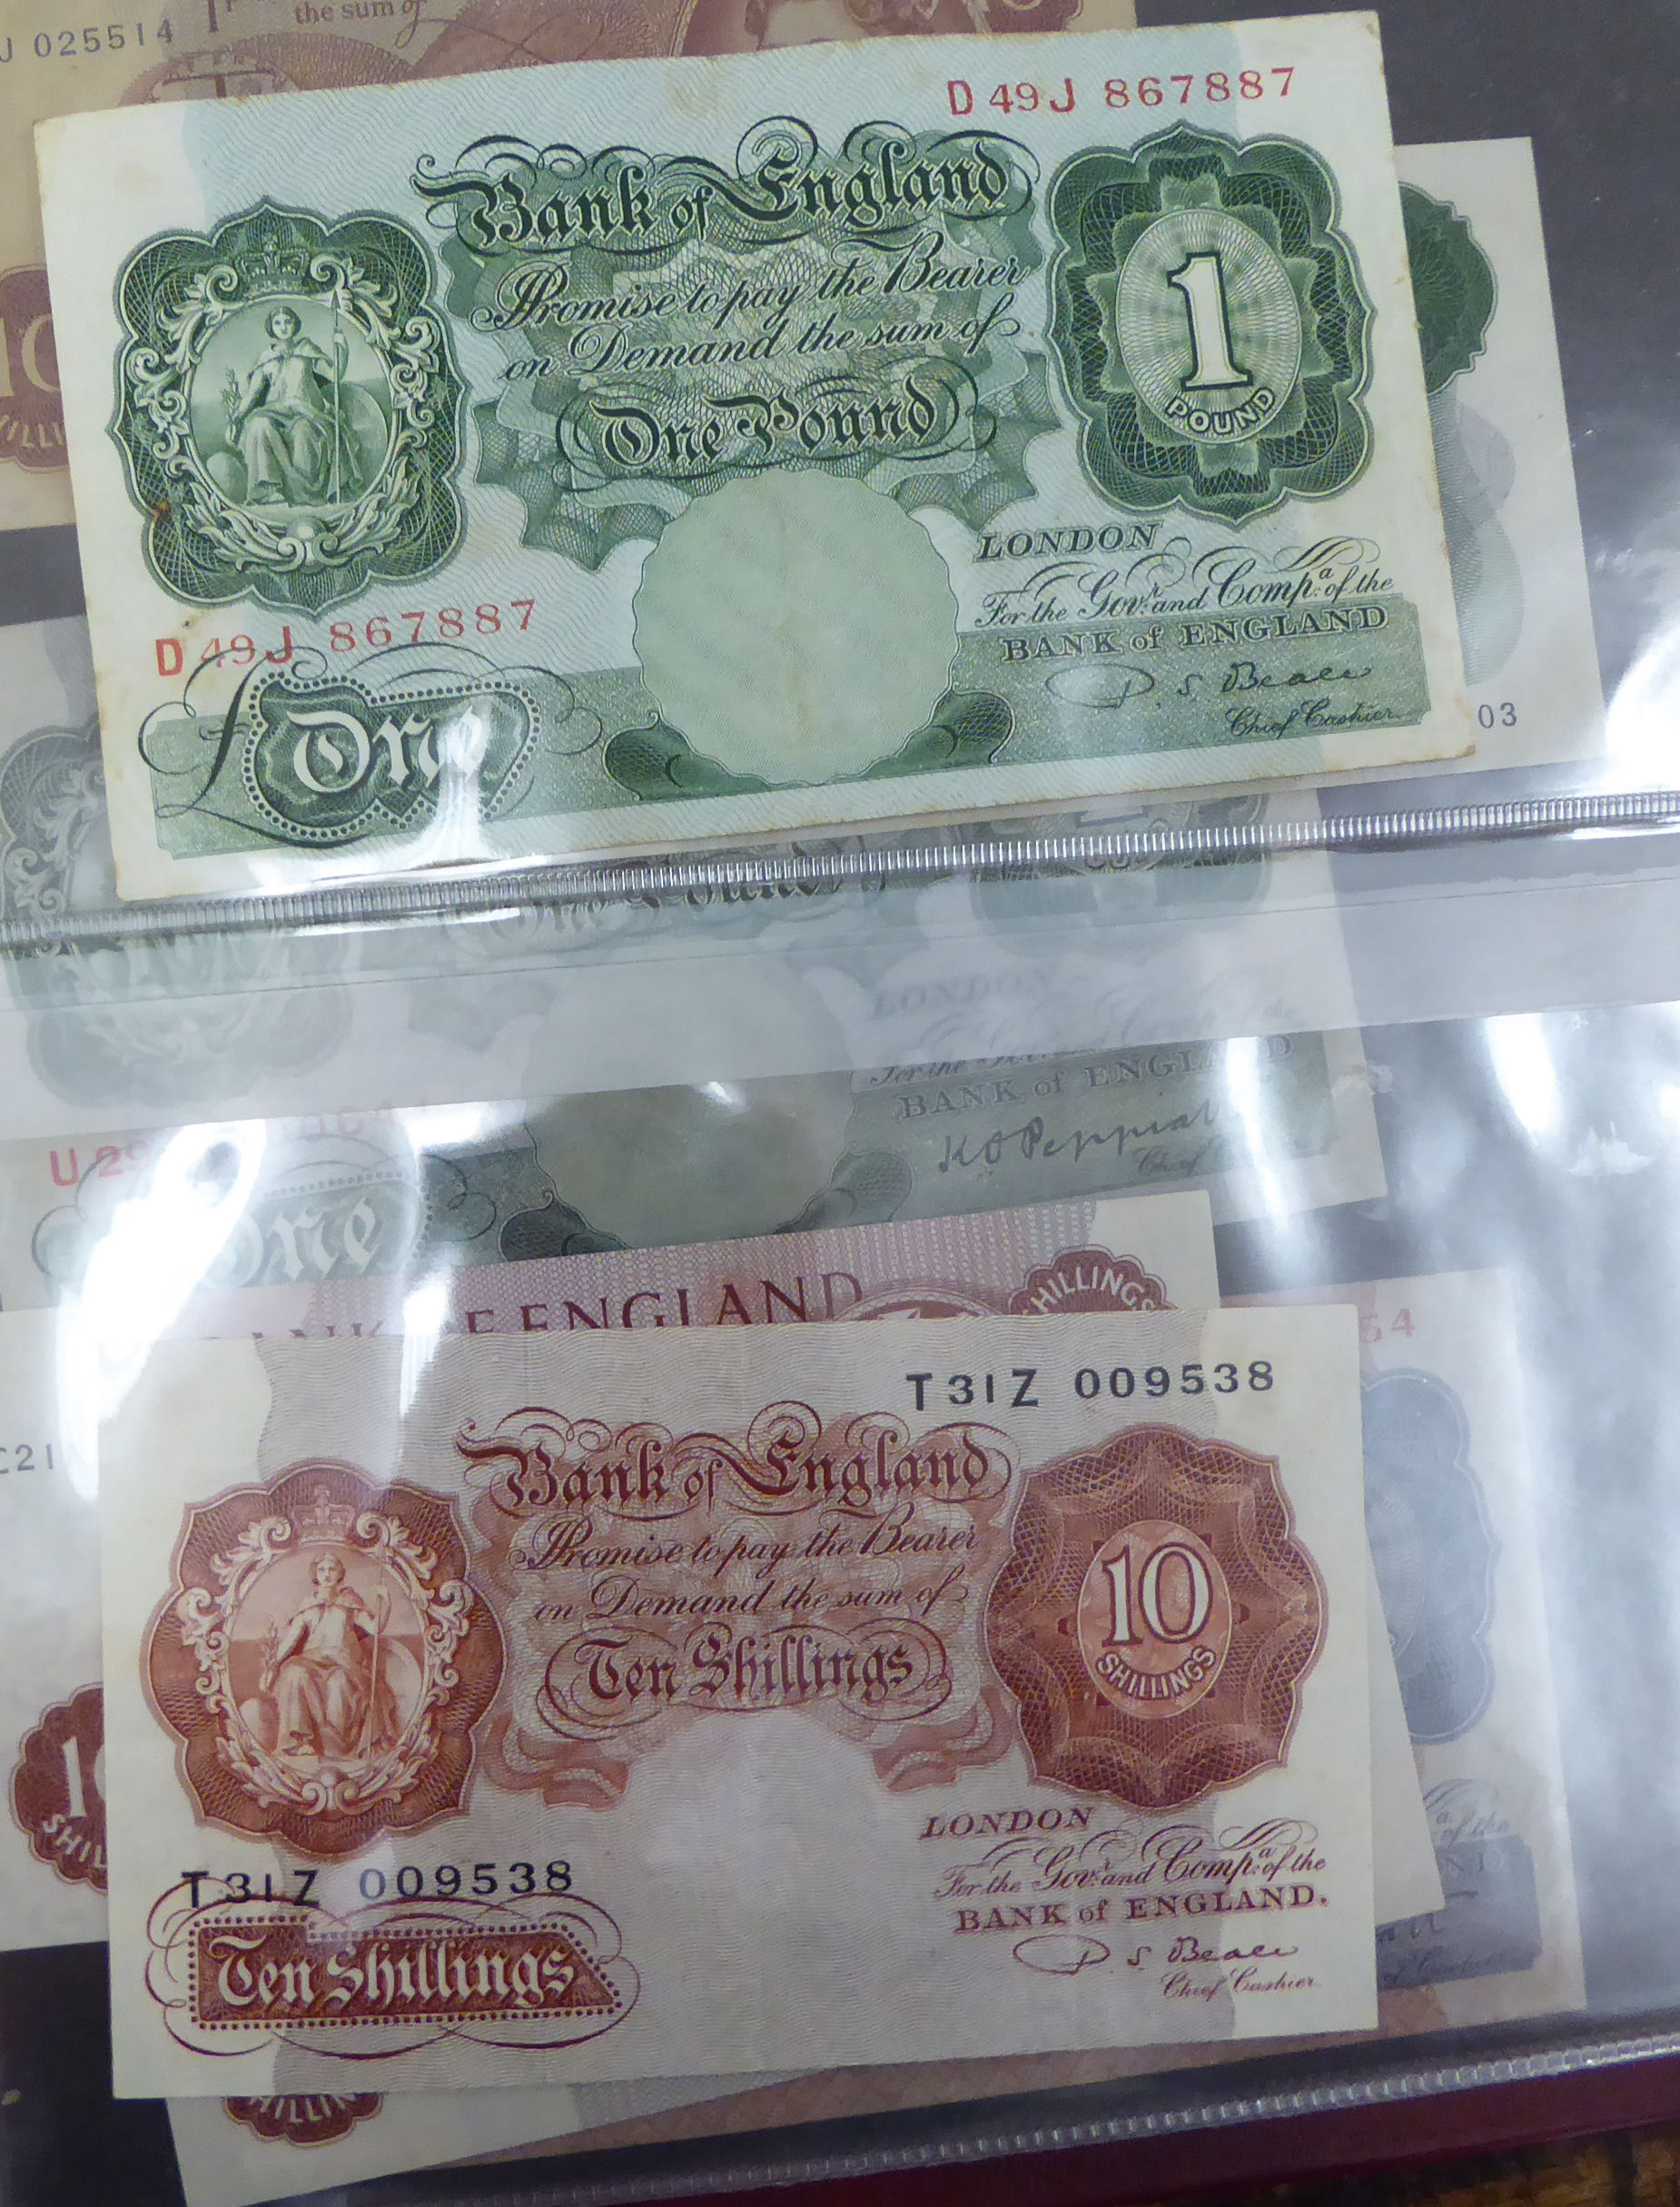 Two uncollated albums collections, containing banknotes from Peru, Uruguay, Turkey, China, Brazil, - Image 12 of 13